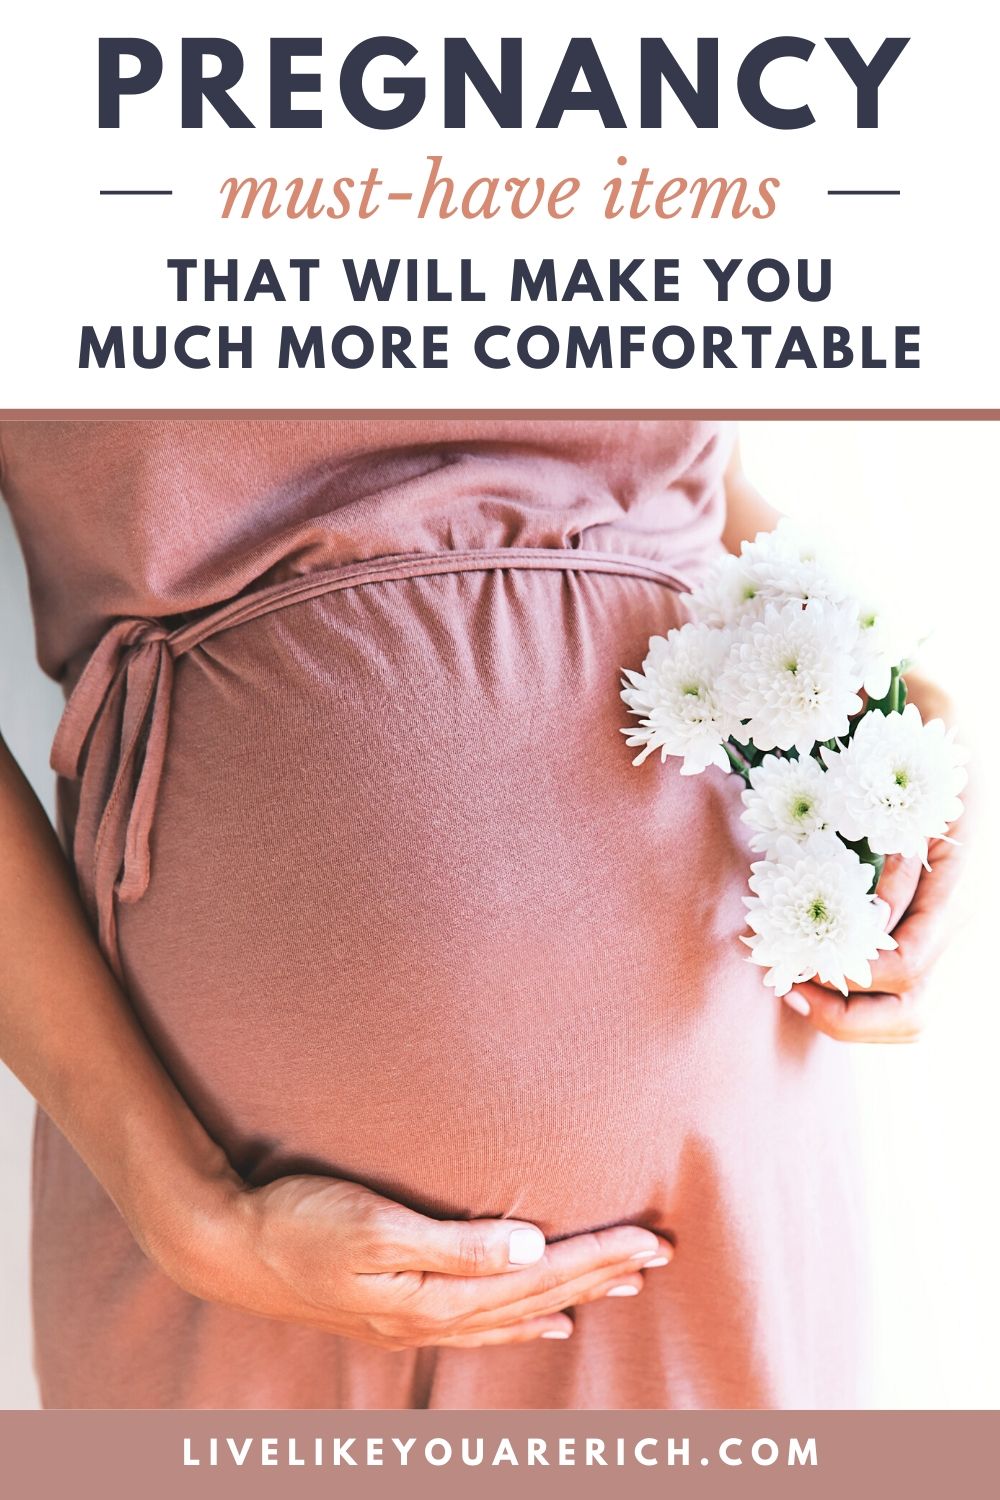 Let’s face it – being pregnant is tough! I like to make it as comfortable as possible and I want to share what worked in my last pregnancy and what I’ve found helpful in this pregnancy with you too. This is a GREAT list. Some of these must-have items are very unique...you may have never heard of them (especially 2, 7, & 13). 